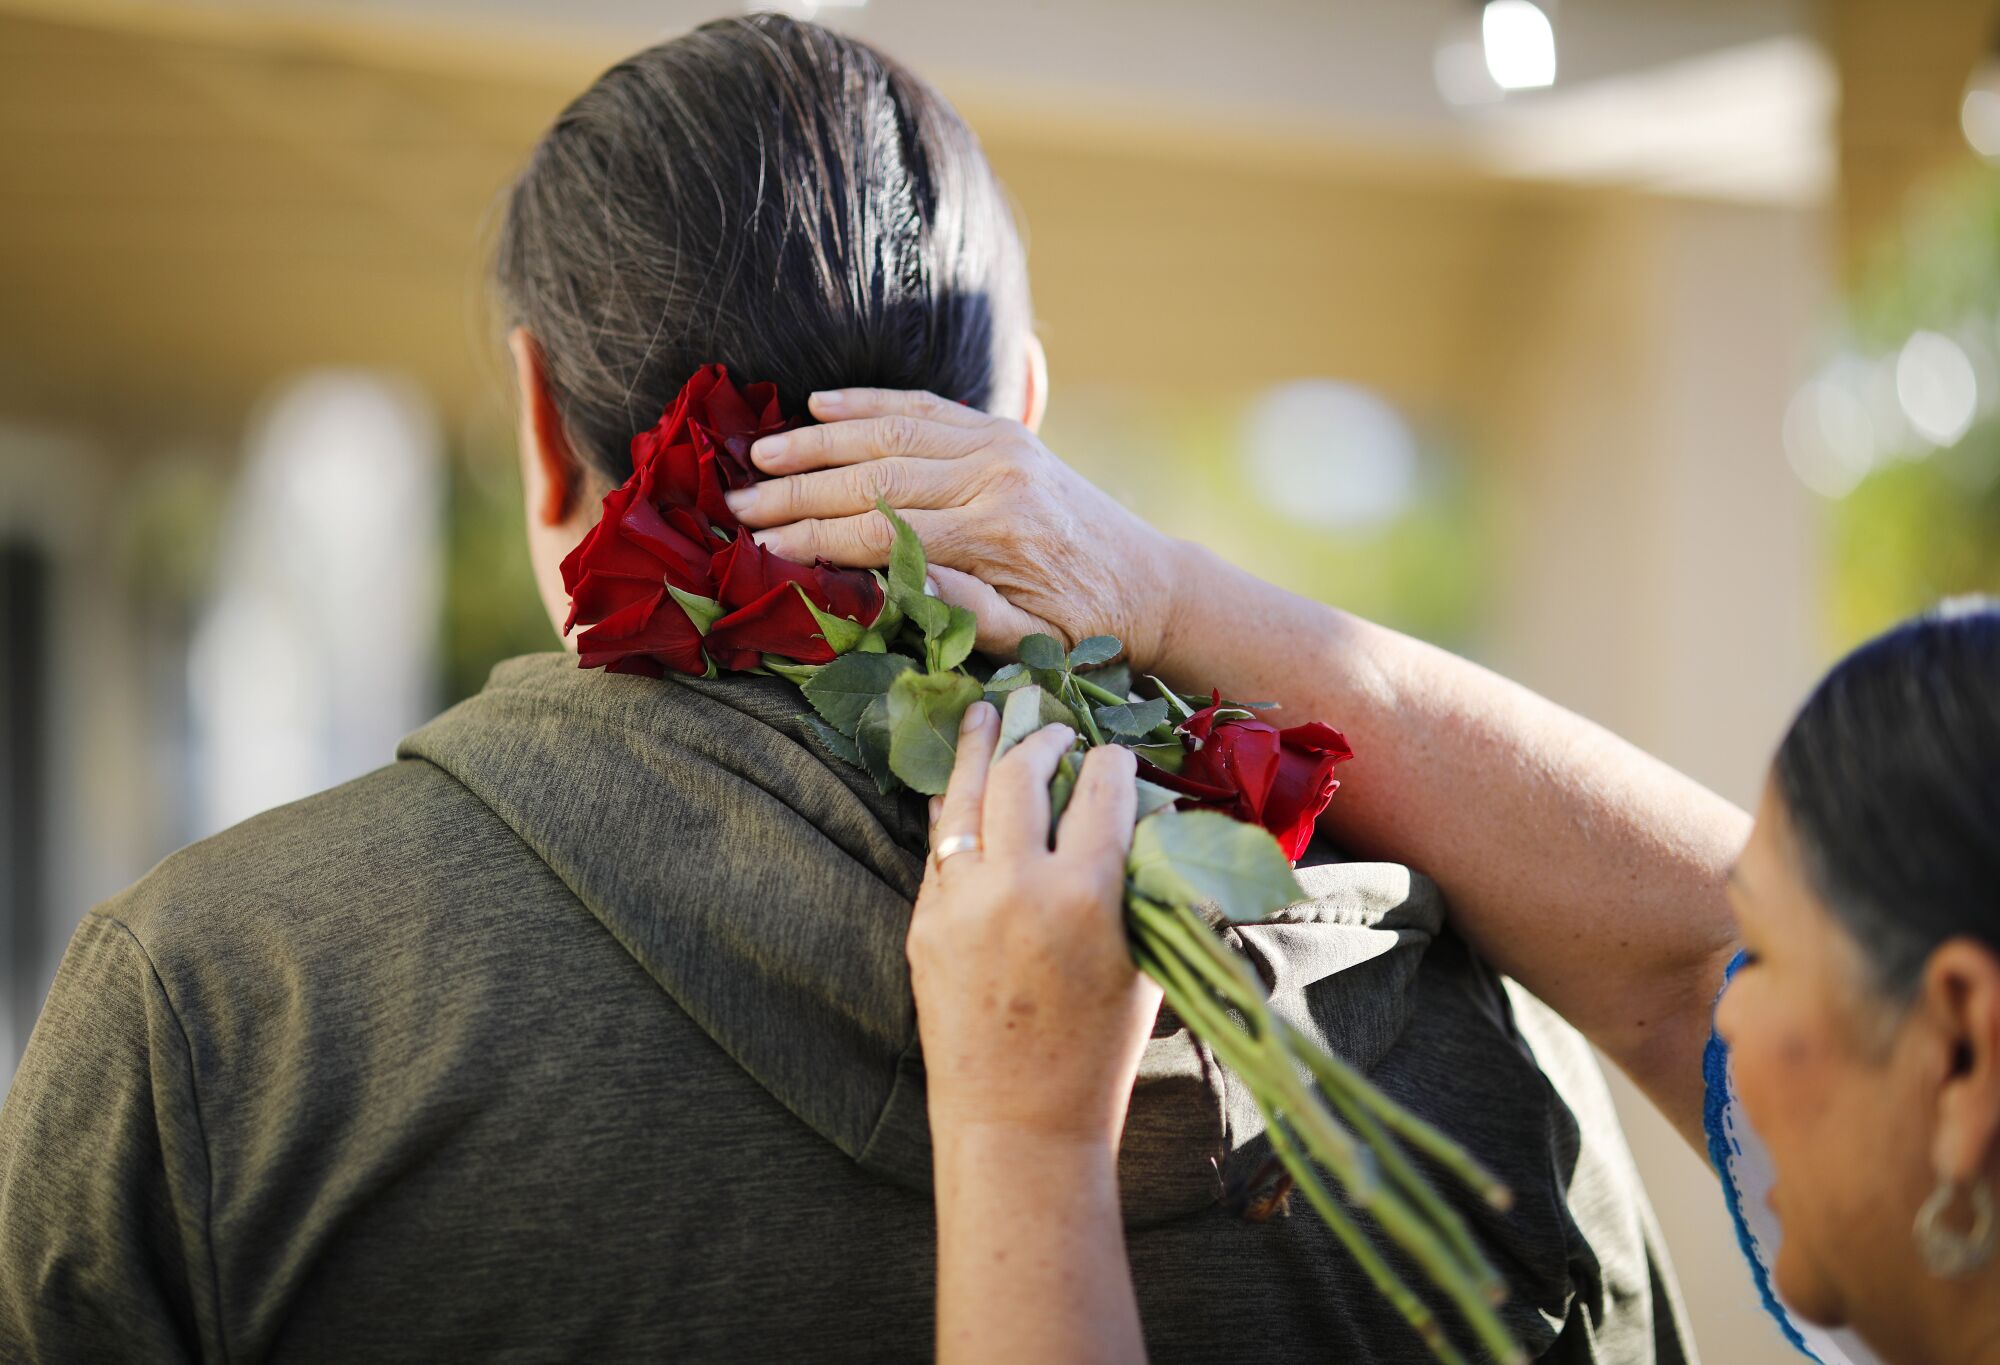 Sesma holds red roses against the back of a client's neck